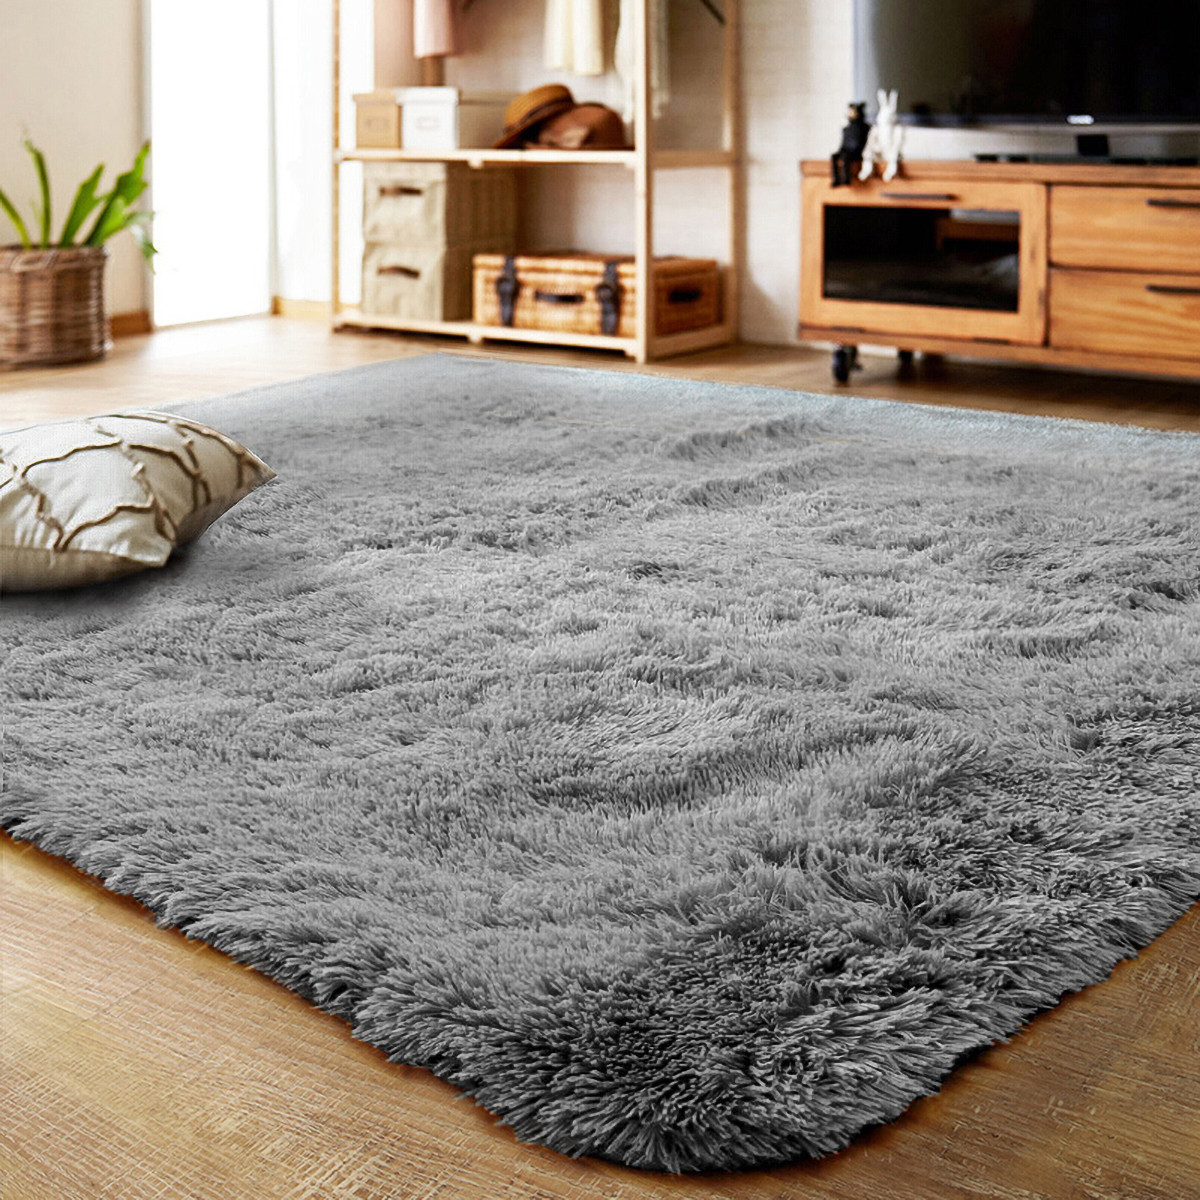 Big Rugs For Living Room
 LOCHAS Ultra Soft Indoor Modern Area Rugs Fluffy Living